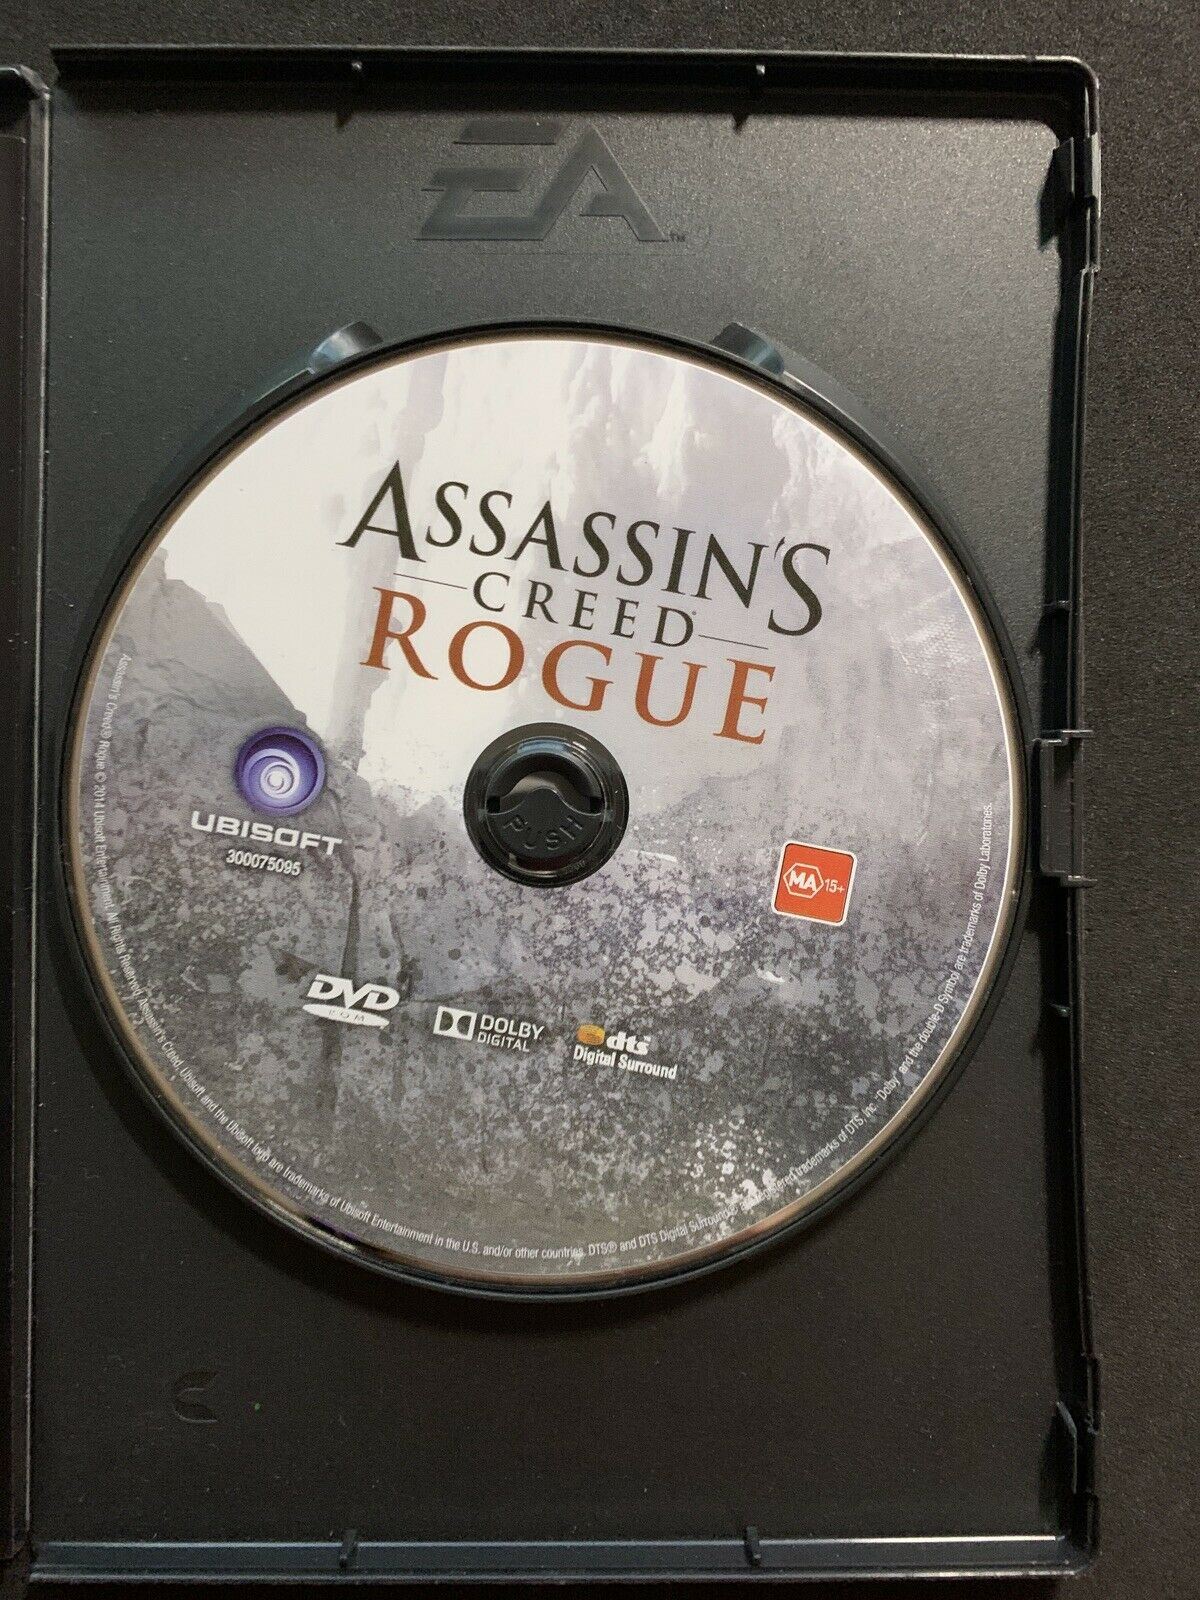 Assassins Creed Rogue - PC DVD Action Adventure Game